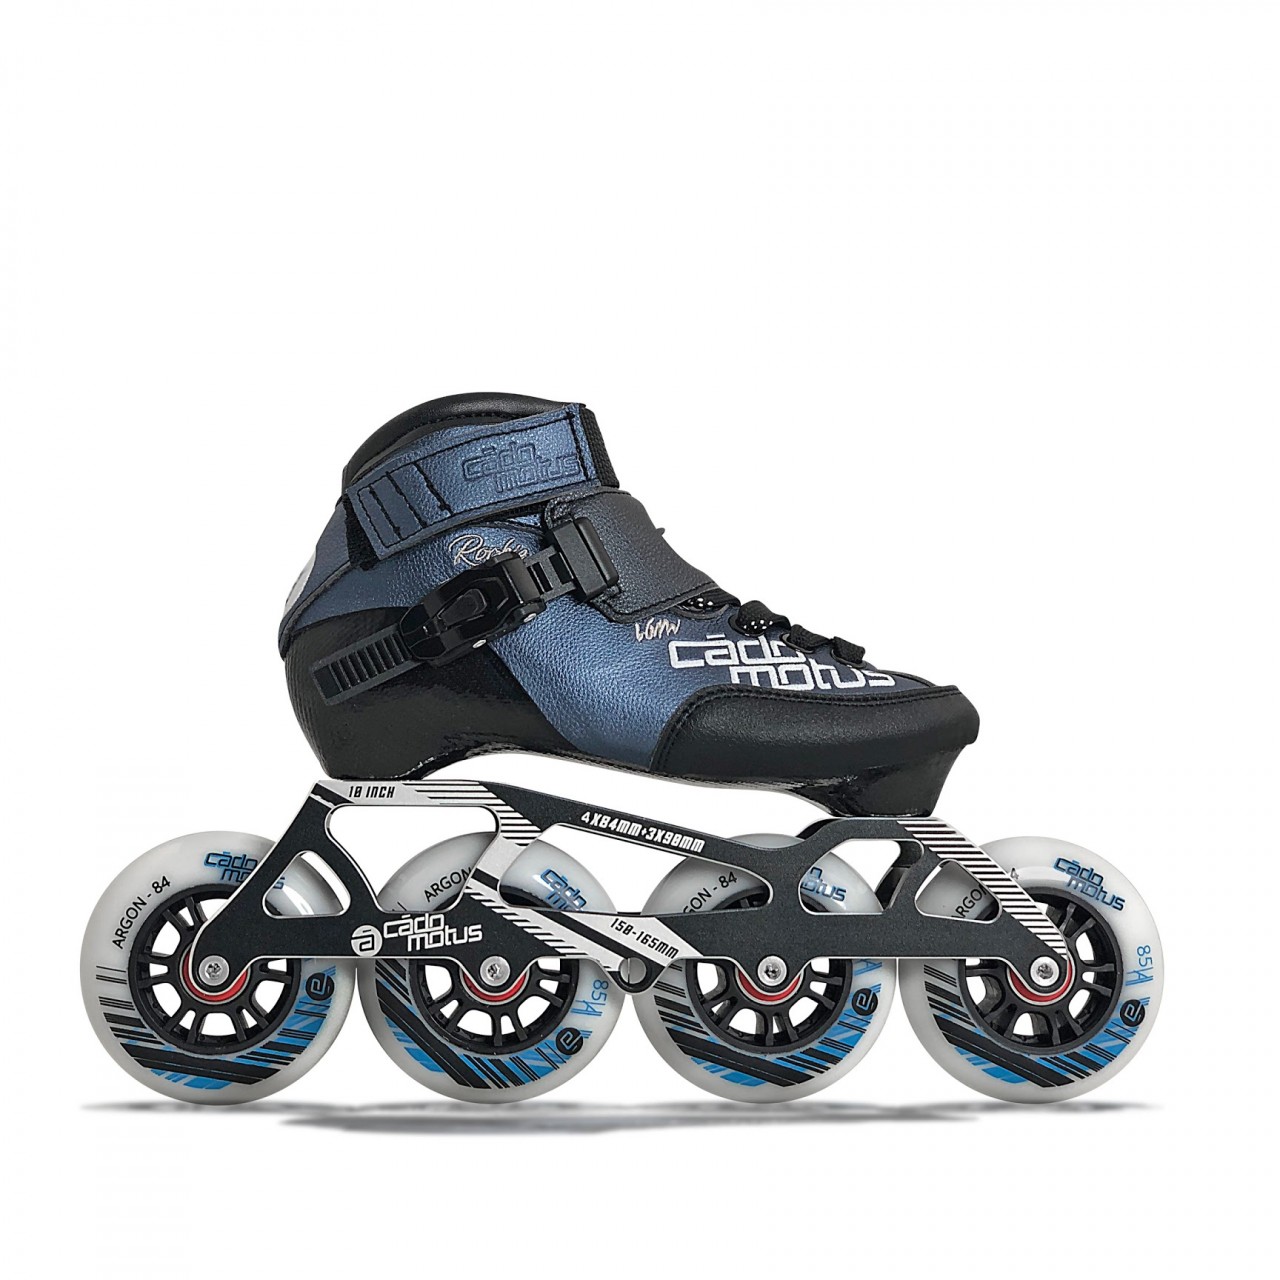 Rookie Two Kids Inline Skate 4x84 | 3x90 race setup + extra ankle support